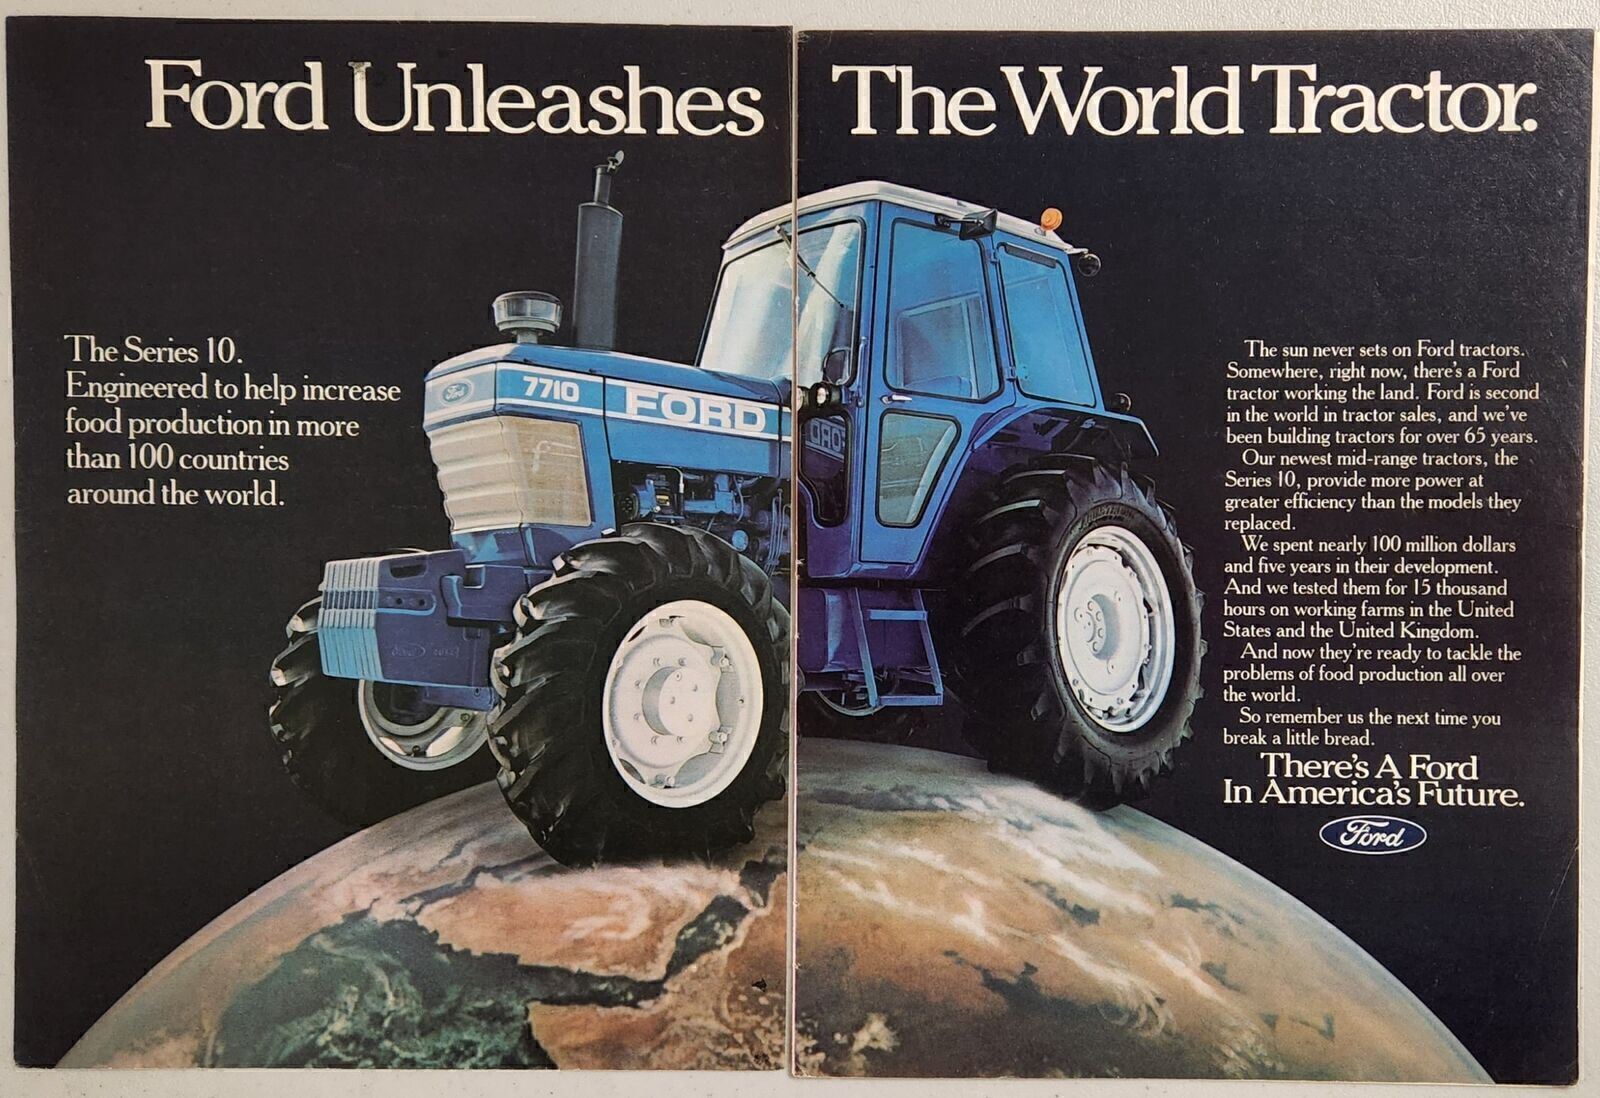 1982  Print Ad Ford Series 10 Model 7710 Tractors More Power Provided